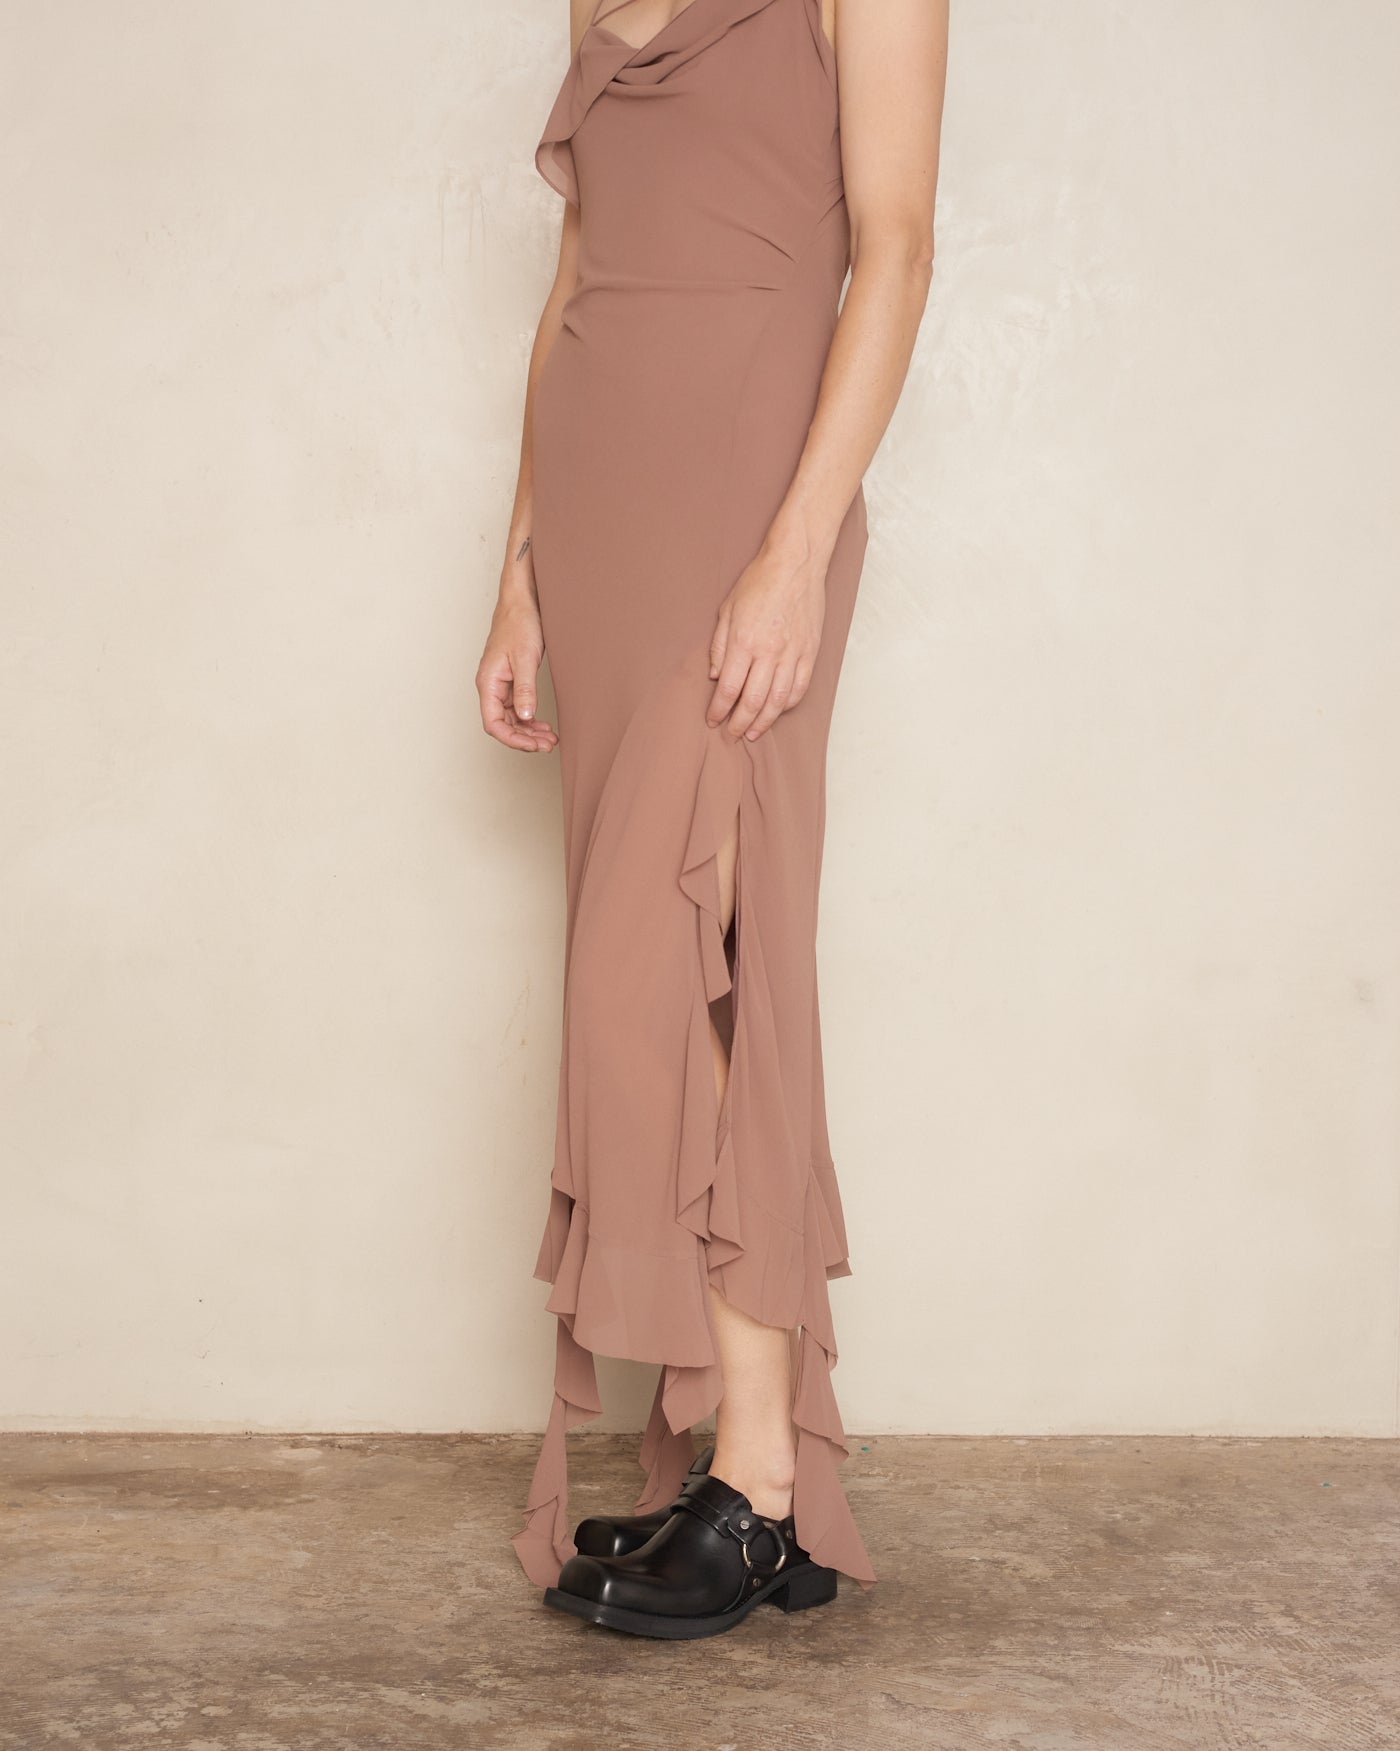 Toffee Brown Ruffle Strap Dress